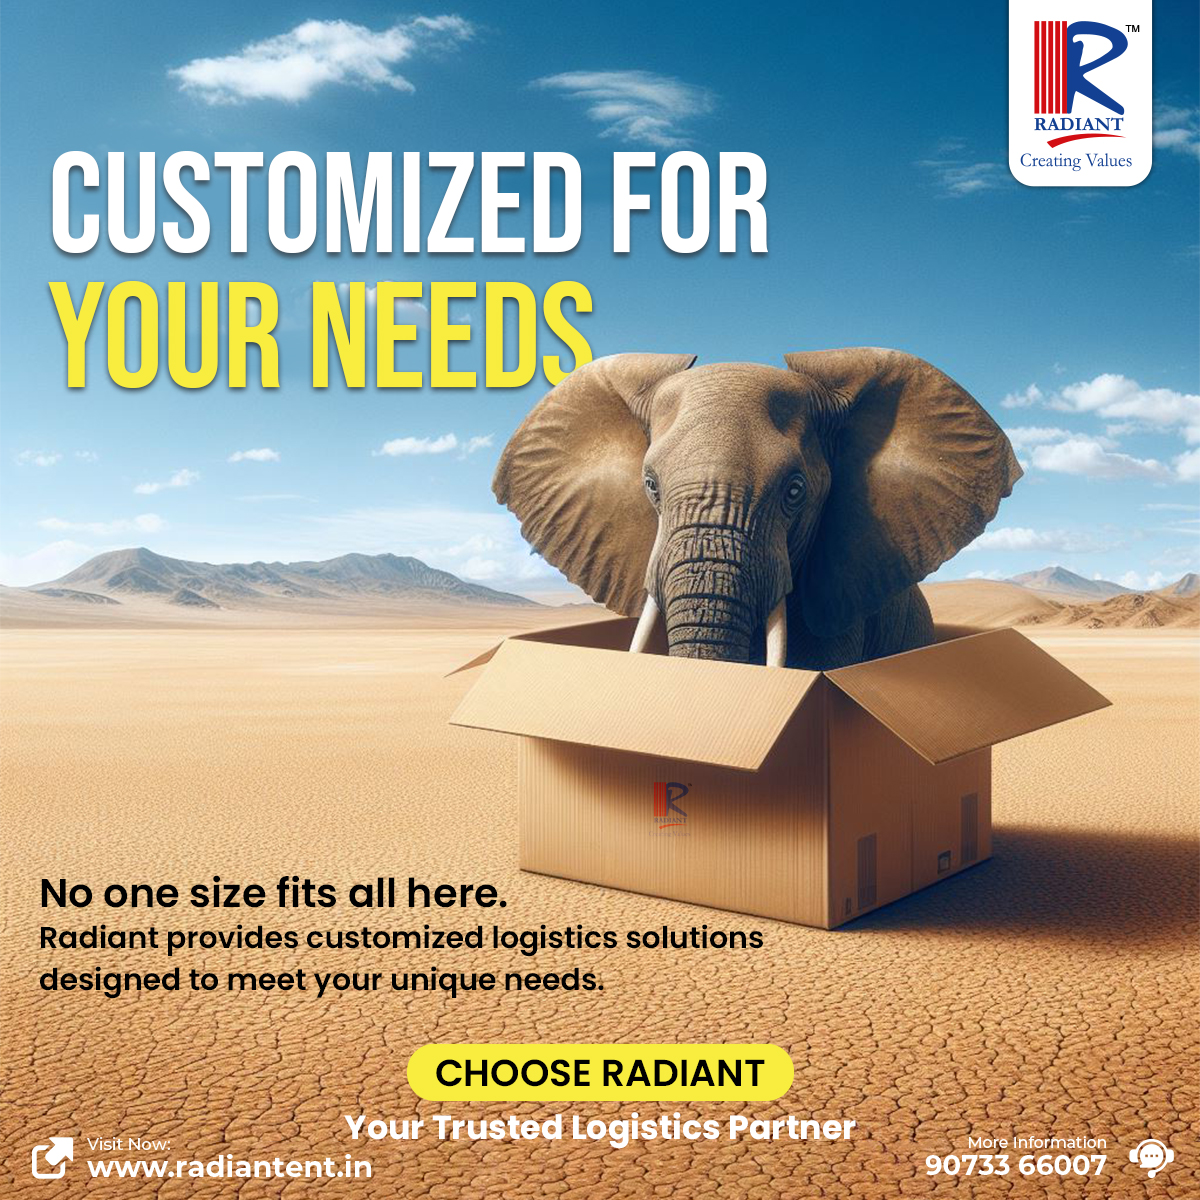 At Radiant, we understand the complexity and diversity of logistics requirements across different businesses. 

Visit Us: radiantent.in
Call Us: 90733 66007
.
.
#CustomLogistics #PersonalizedSolutions #BusinessDiversity #TailoredLogistics #LogisticsExpertise